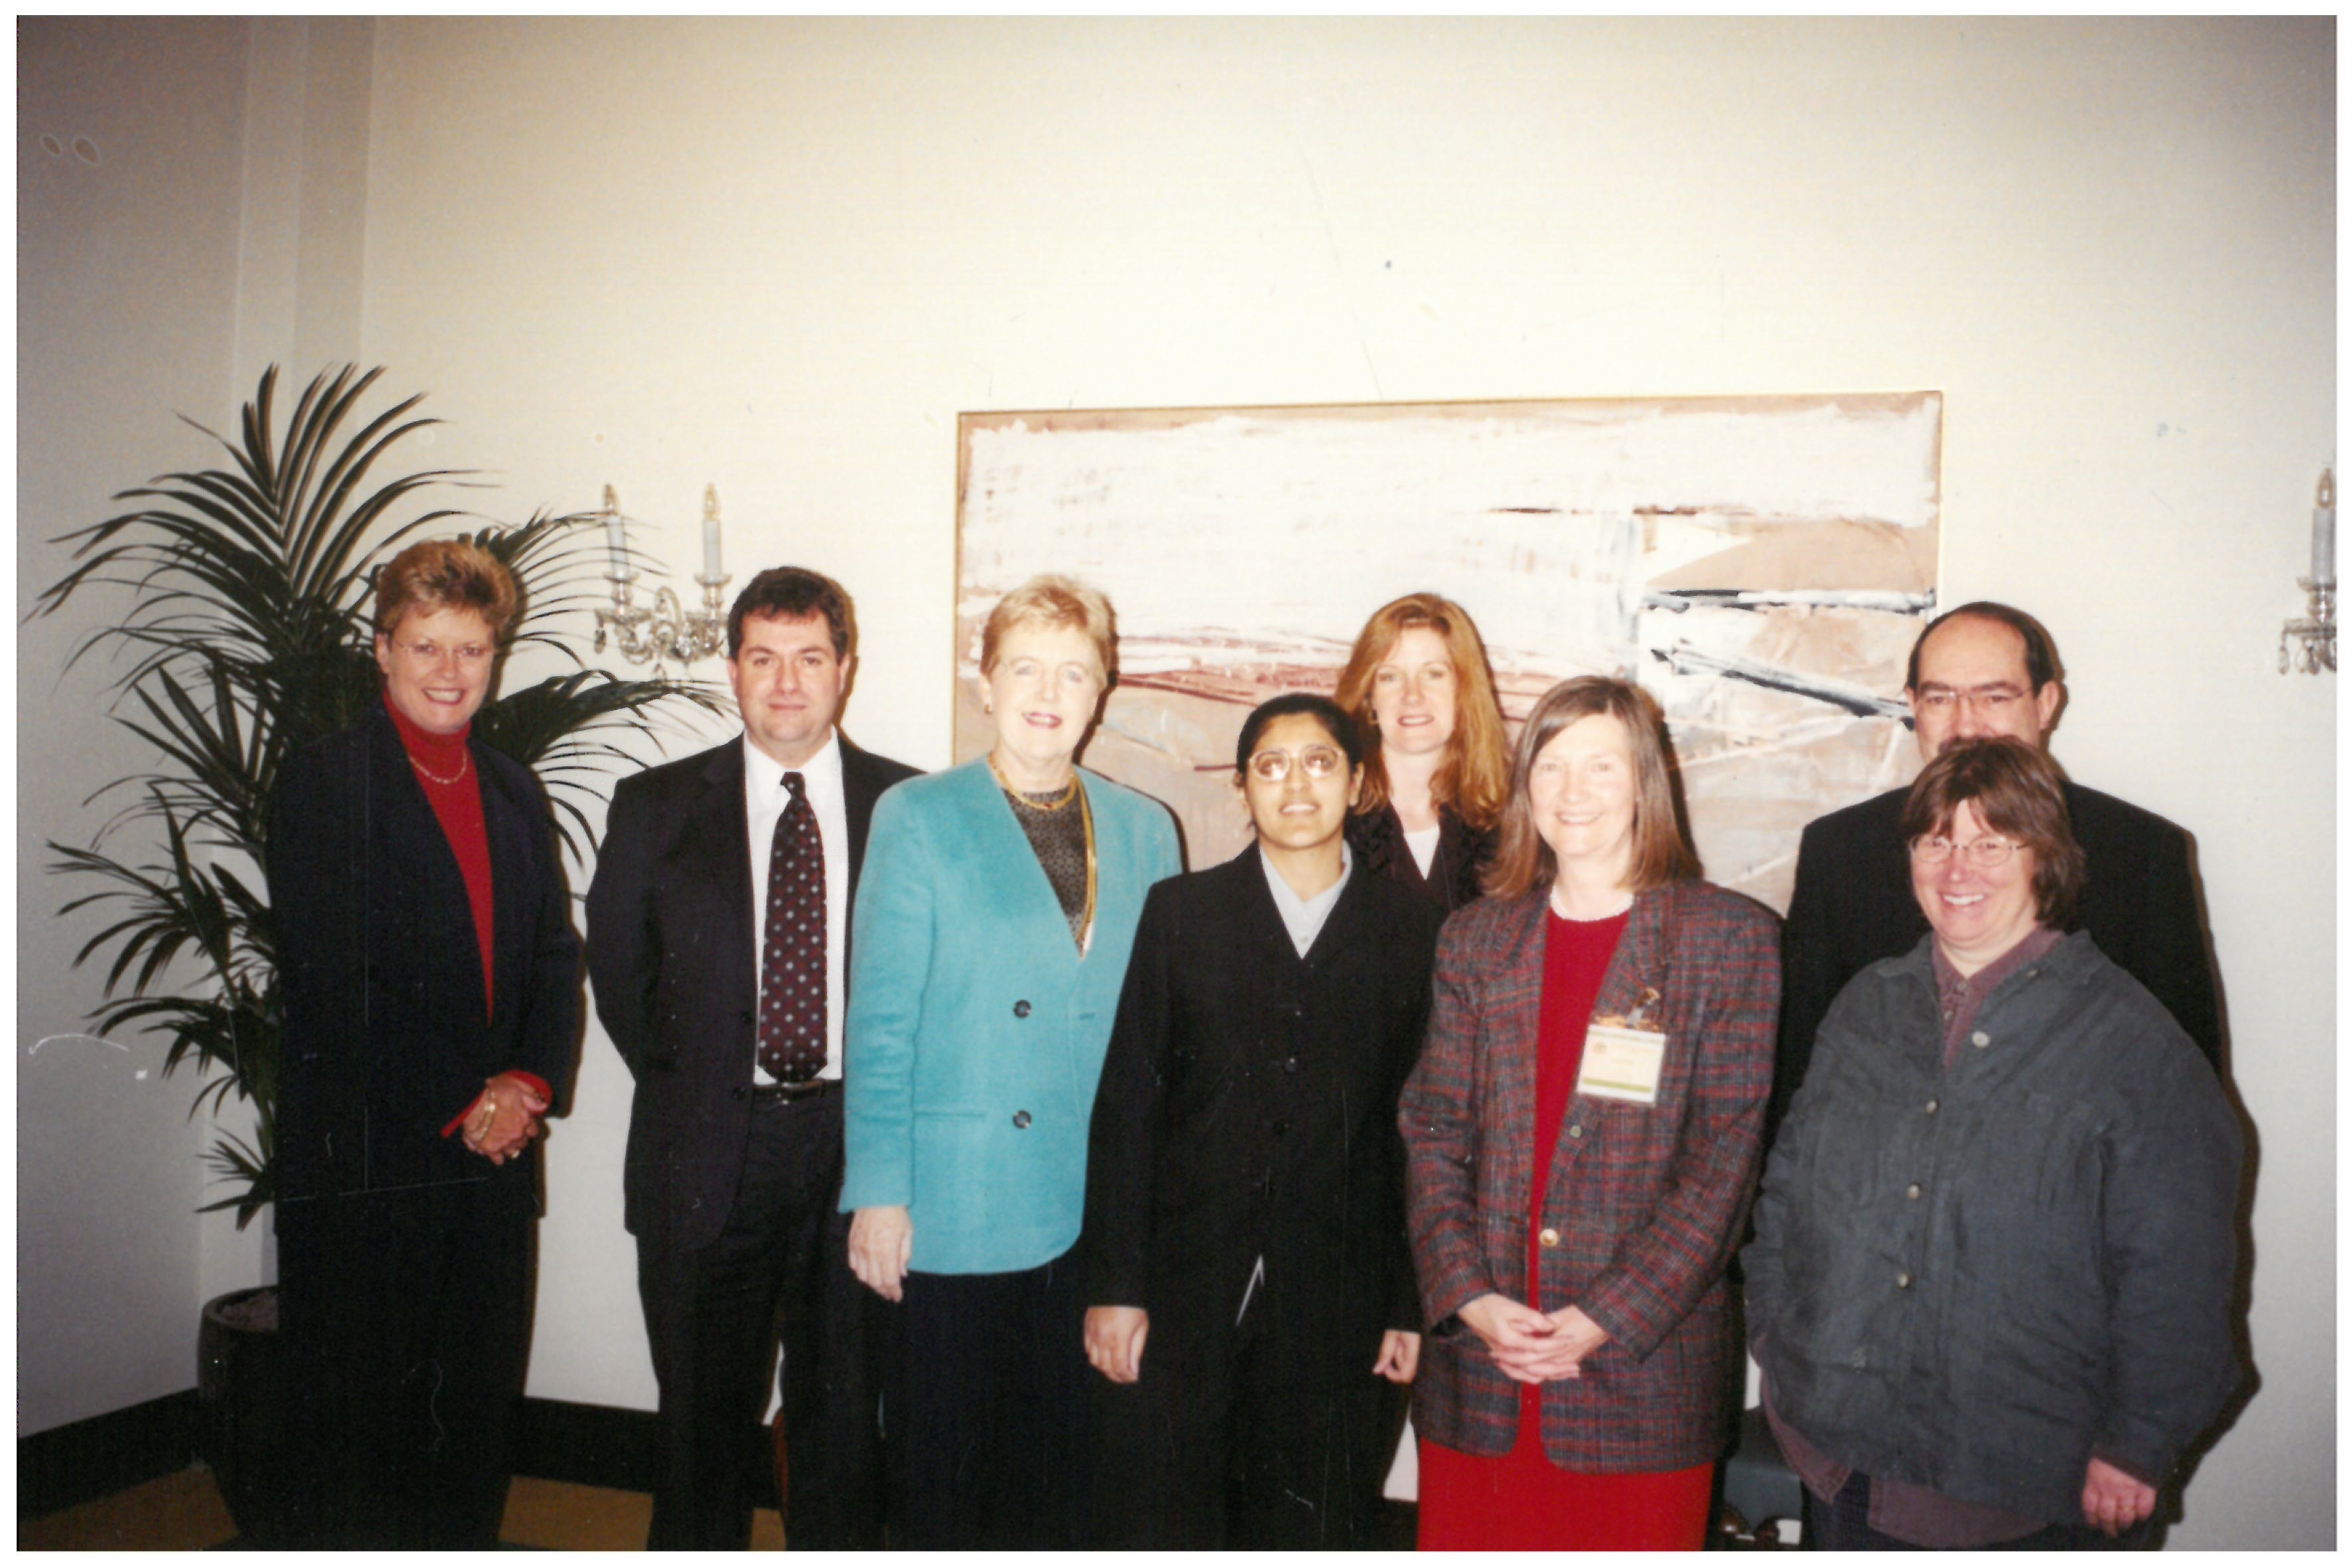 Community Affairs References Committee meeting with representatives of the National Council of Voluntary Child Care Organisations (NCVCCO) at Australia House, London, during the committee's parliamentary delegation to the United Kingdom, 20 April 2001. L-R: Senator Sue Knowles [Deputy Chair], Ian Thwaites [Senior Social Worker, Child Migrants Trust and Steering Group Member], Senator Rosemary Crowley [Delegation Leader; Chair], Rizwana Shah [Child Migrant Project Administrator, NCVCCO], Kathryn Hutton [Australian Desk Officer, Foreign and Commonwealth Office], Erica De’Ath [Chief Executive, NCVCCO], Senator Andrew Murray and Joan Kerry [Steering Group Member].